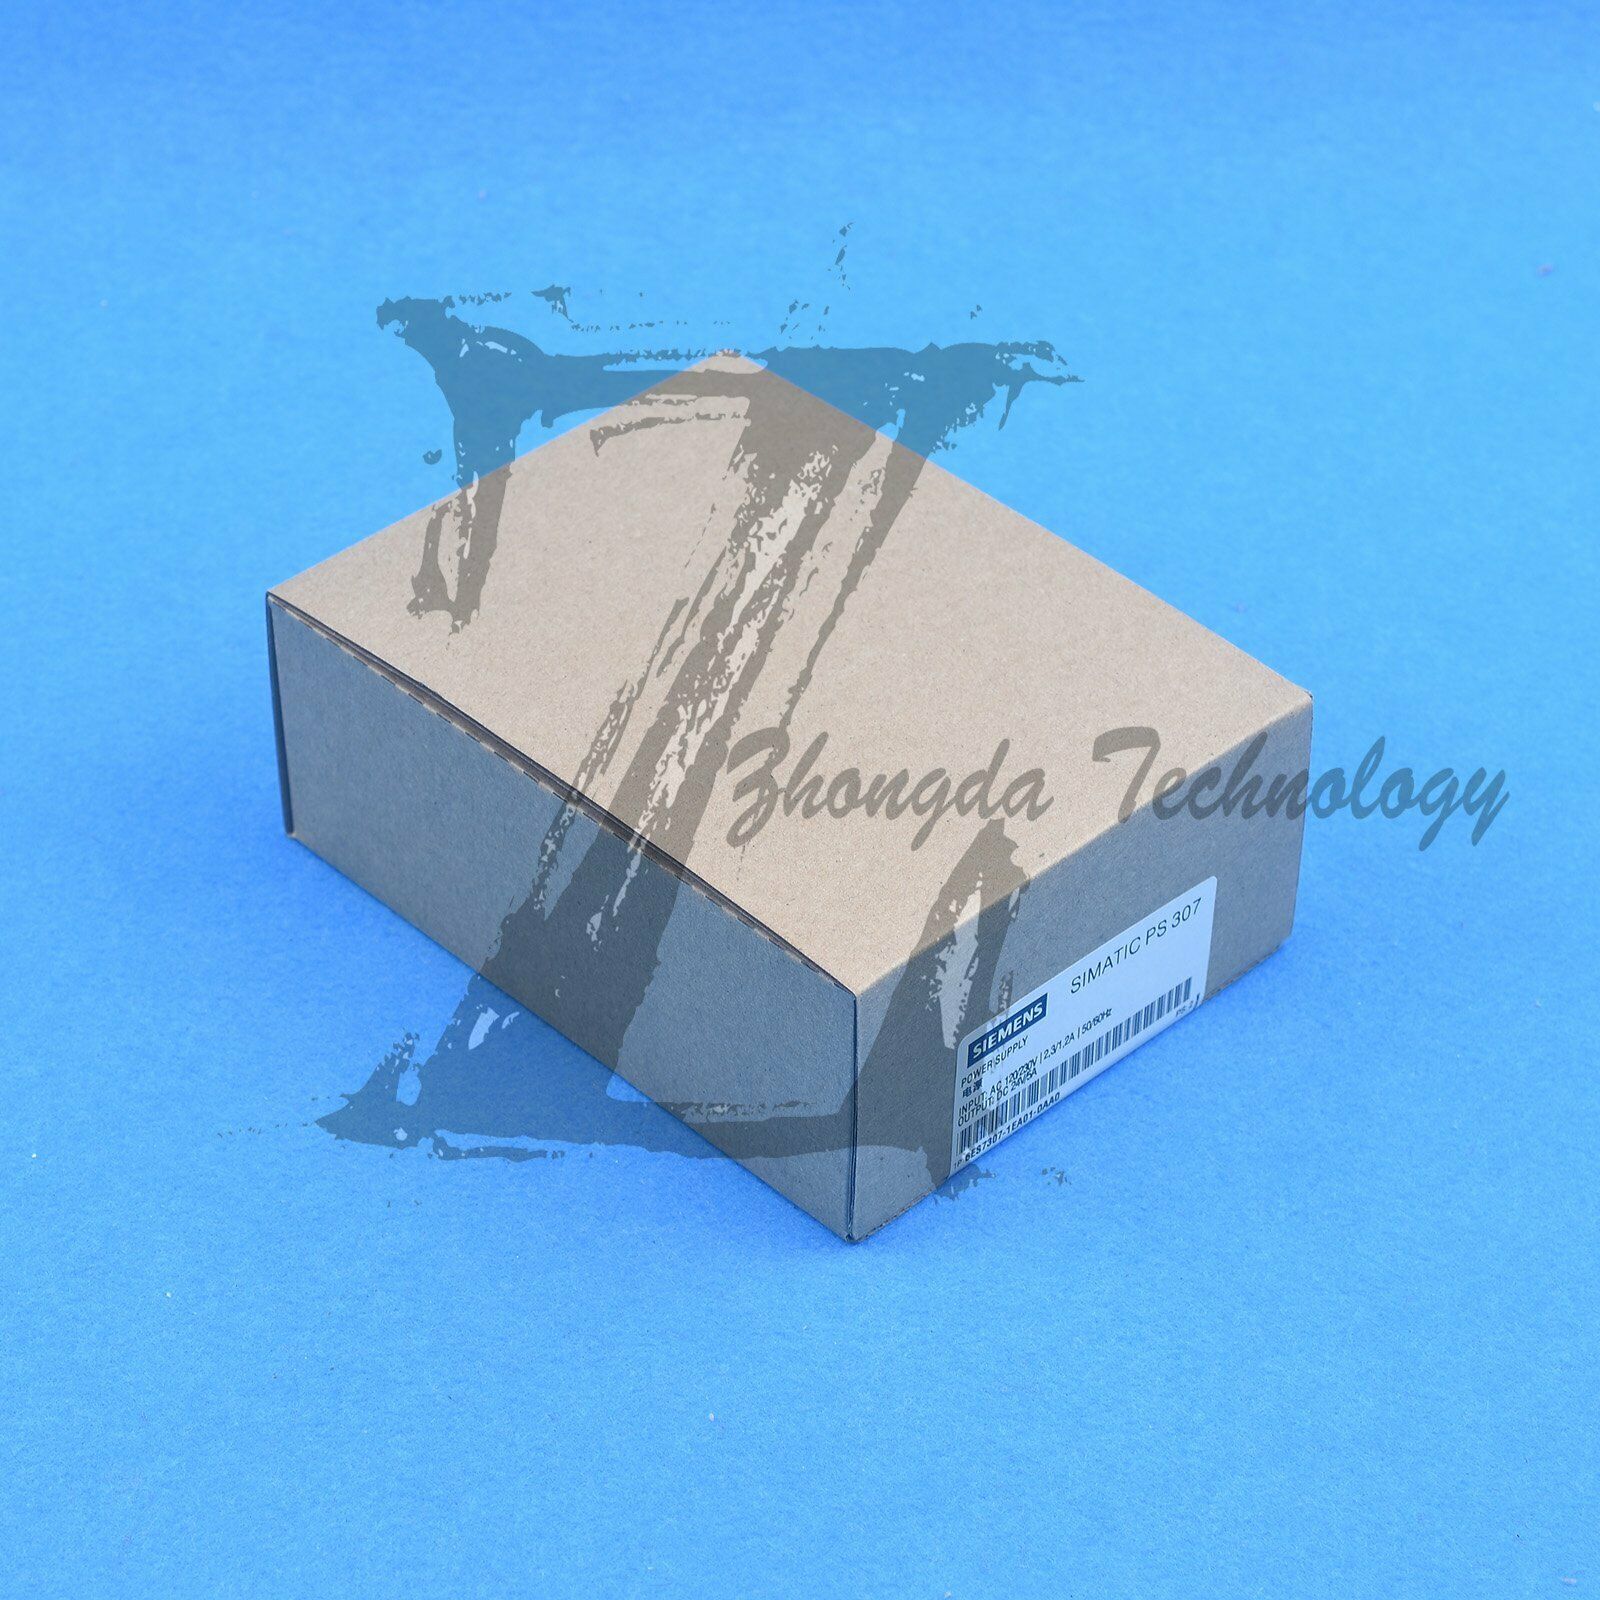 1pc new Siemens power module 6ES7307-1EA01-0AA0 fast delivery KOEED 101-200, 90%, import_2020_10_10_031751, Other, Siemens